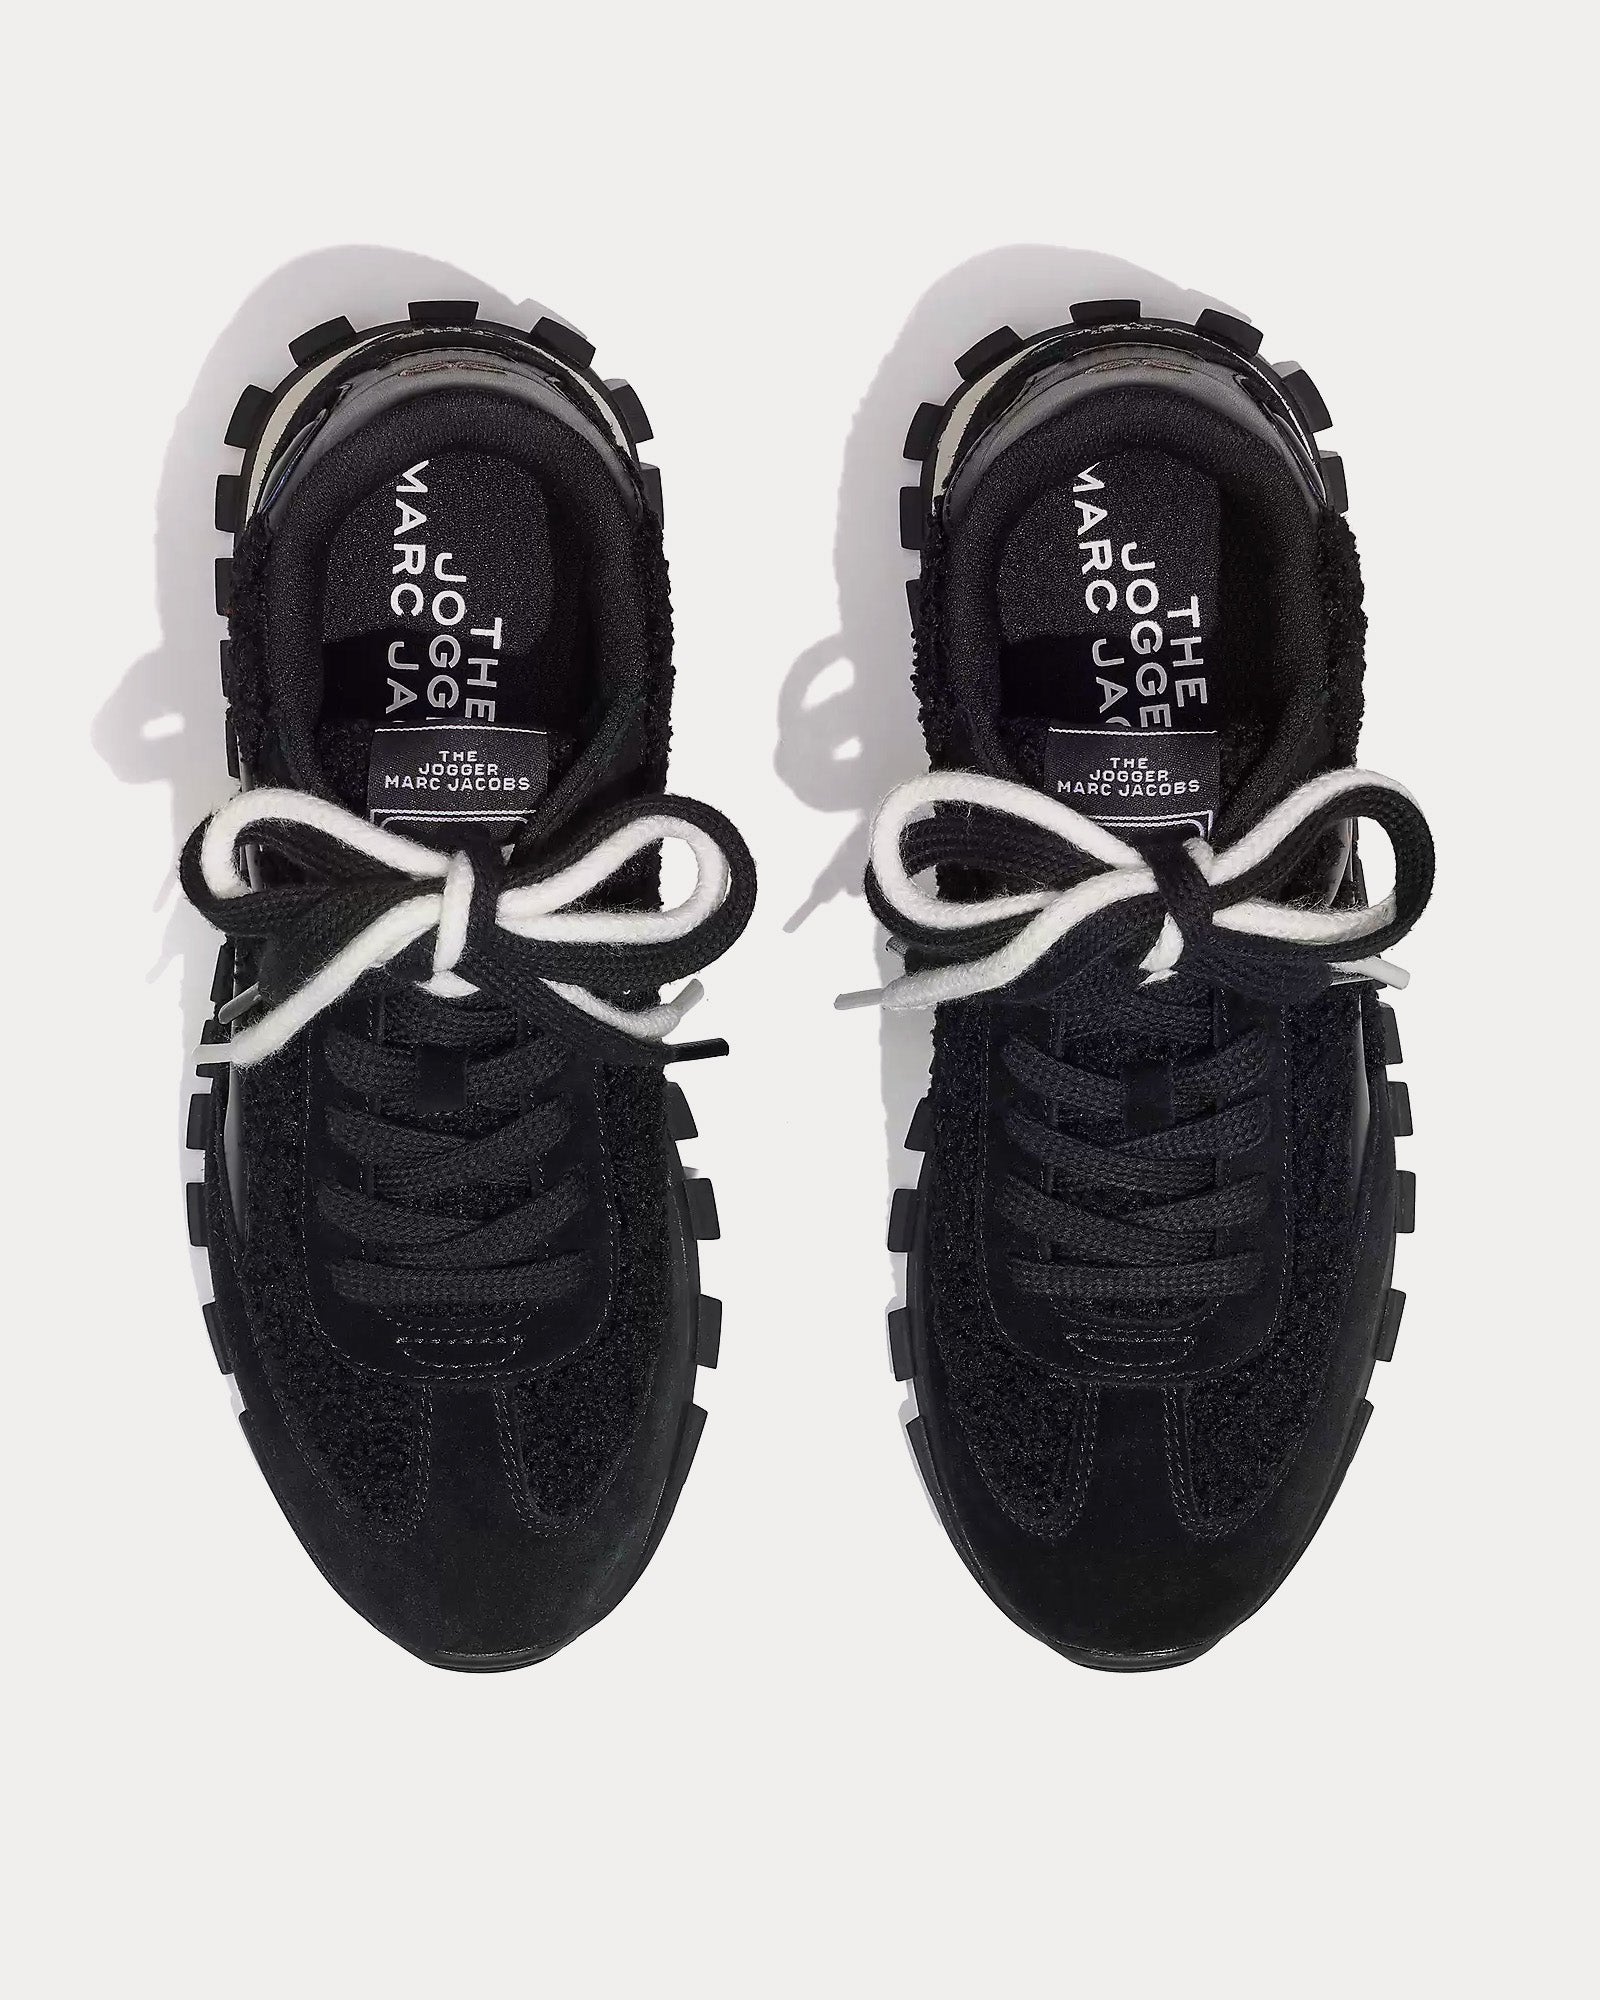 Marc Jacobs - The Teddy Jogger Black Low Top Sneakers